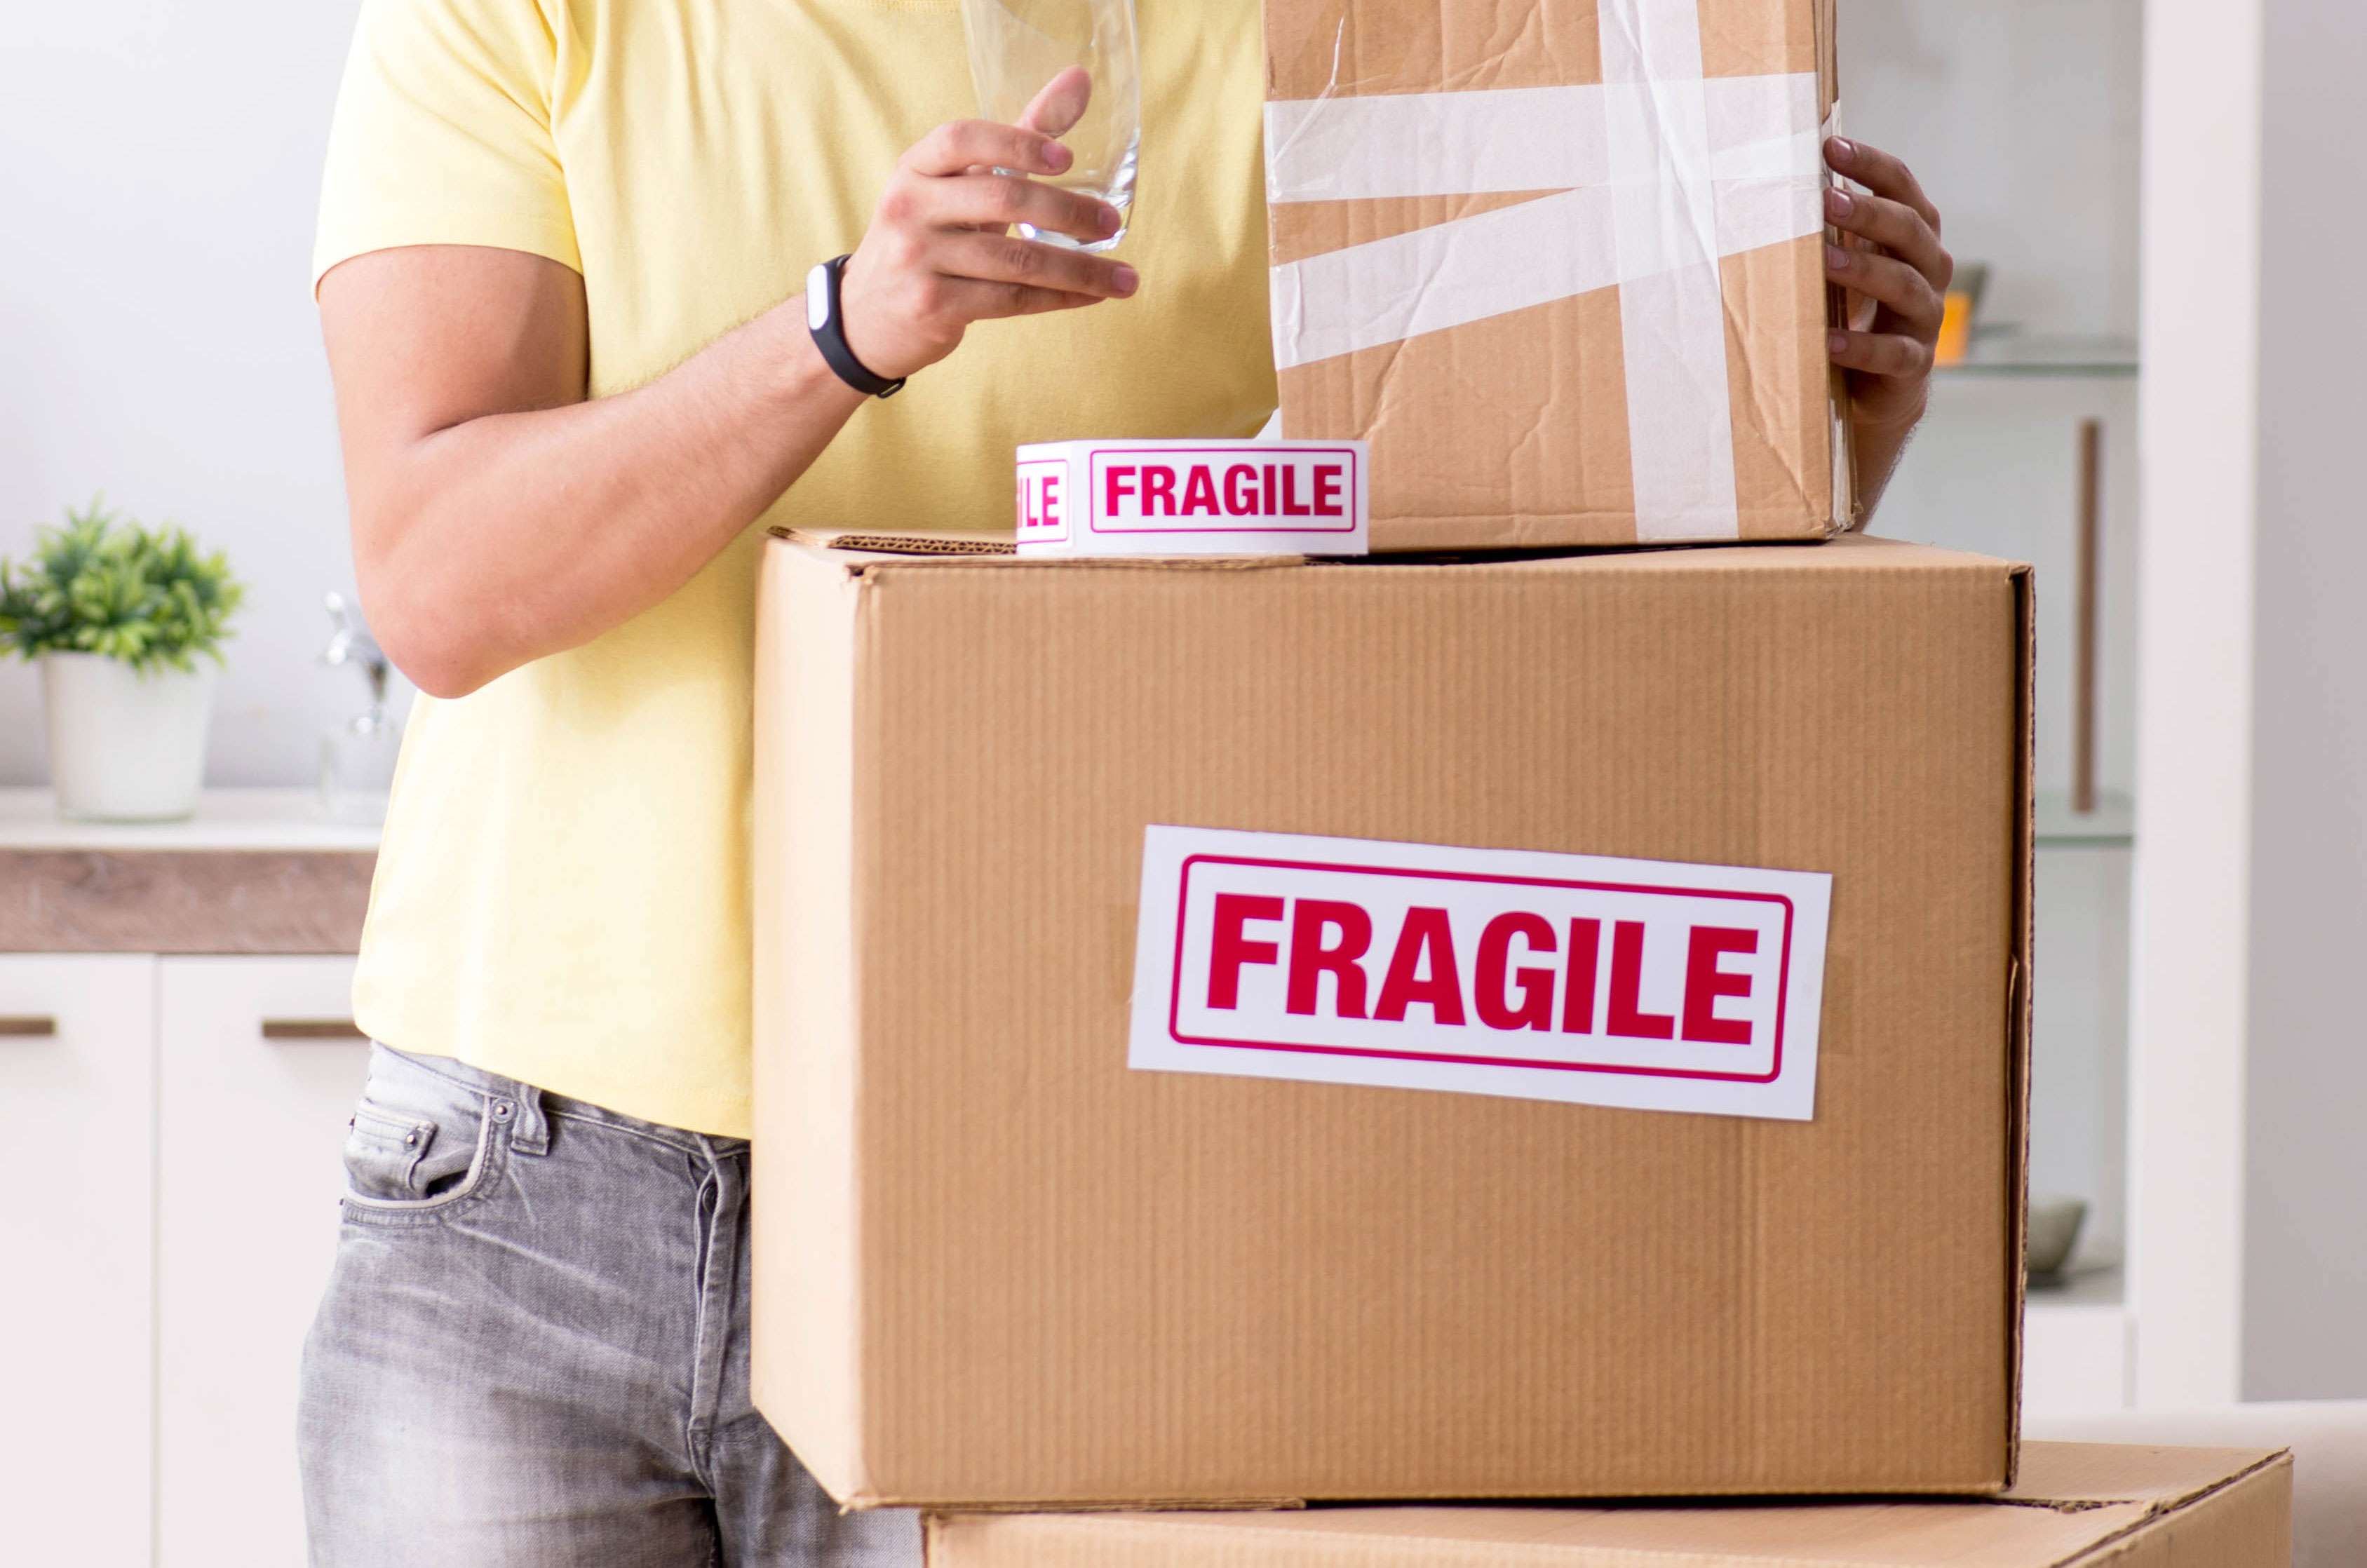 Package items. Fragile goods. Fragile Box. Пакинг. Fragile items Packing things.